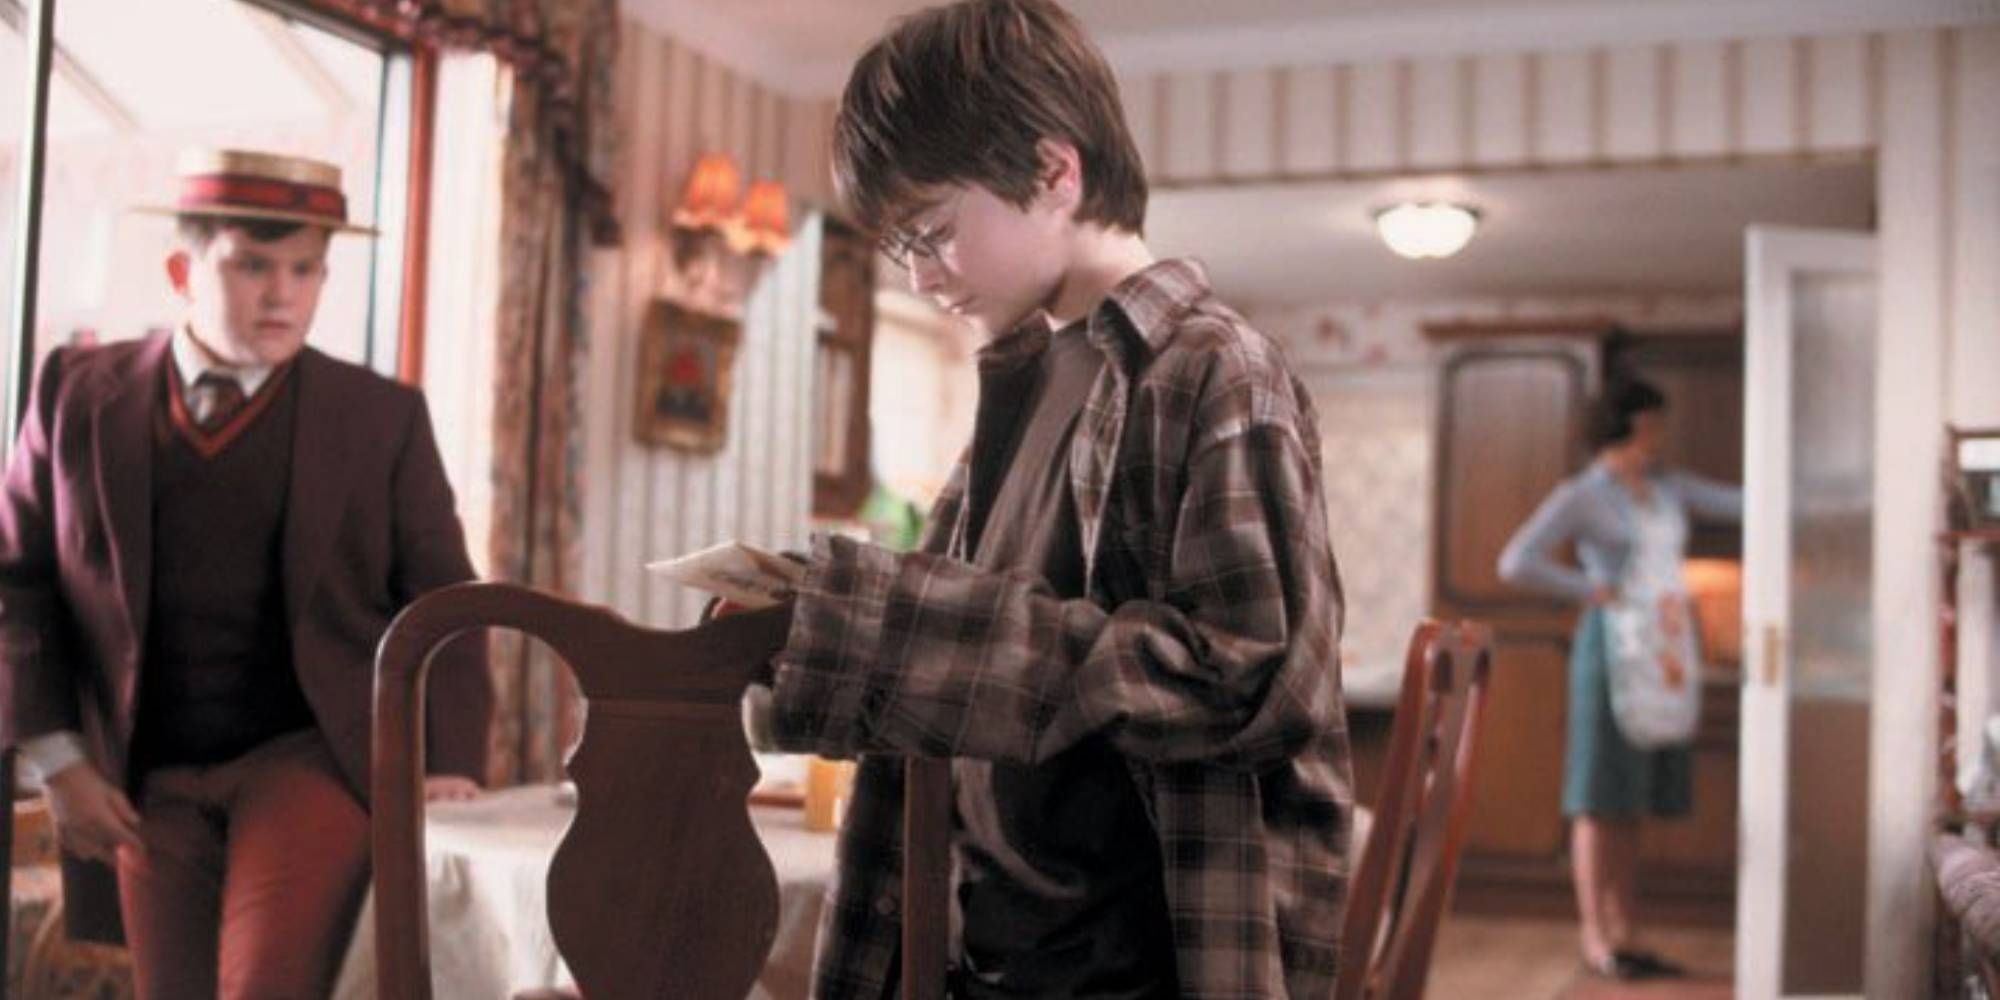 Harry reads a letter next to Dudley in Sorcerer's Stone 